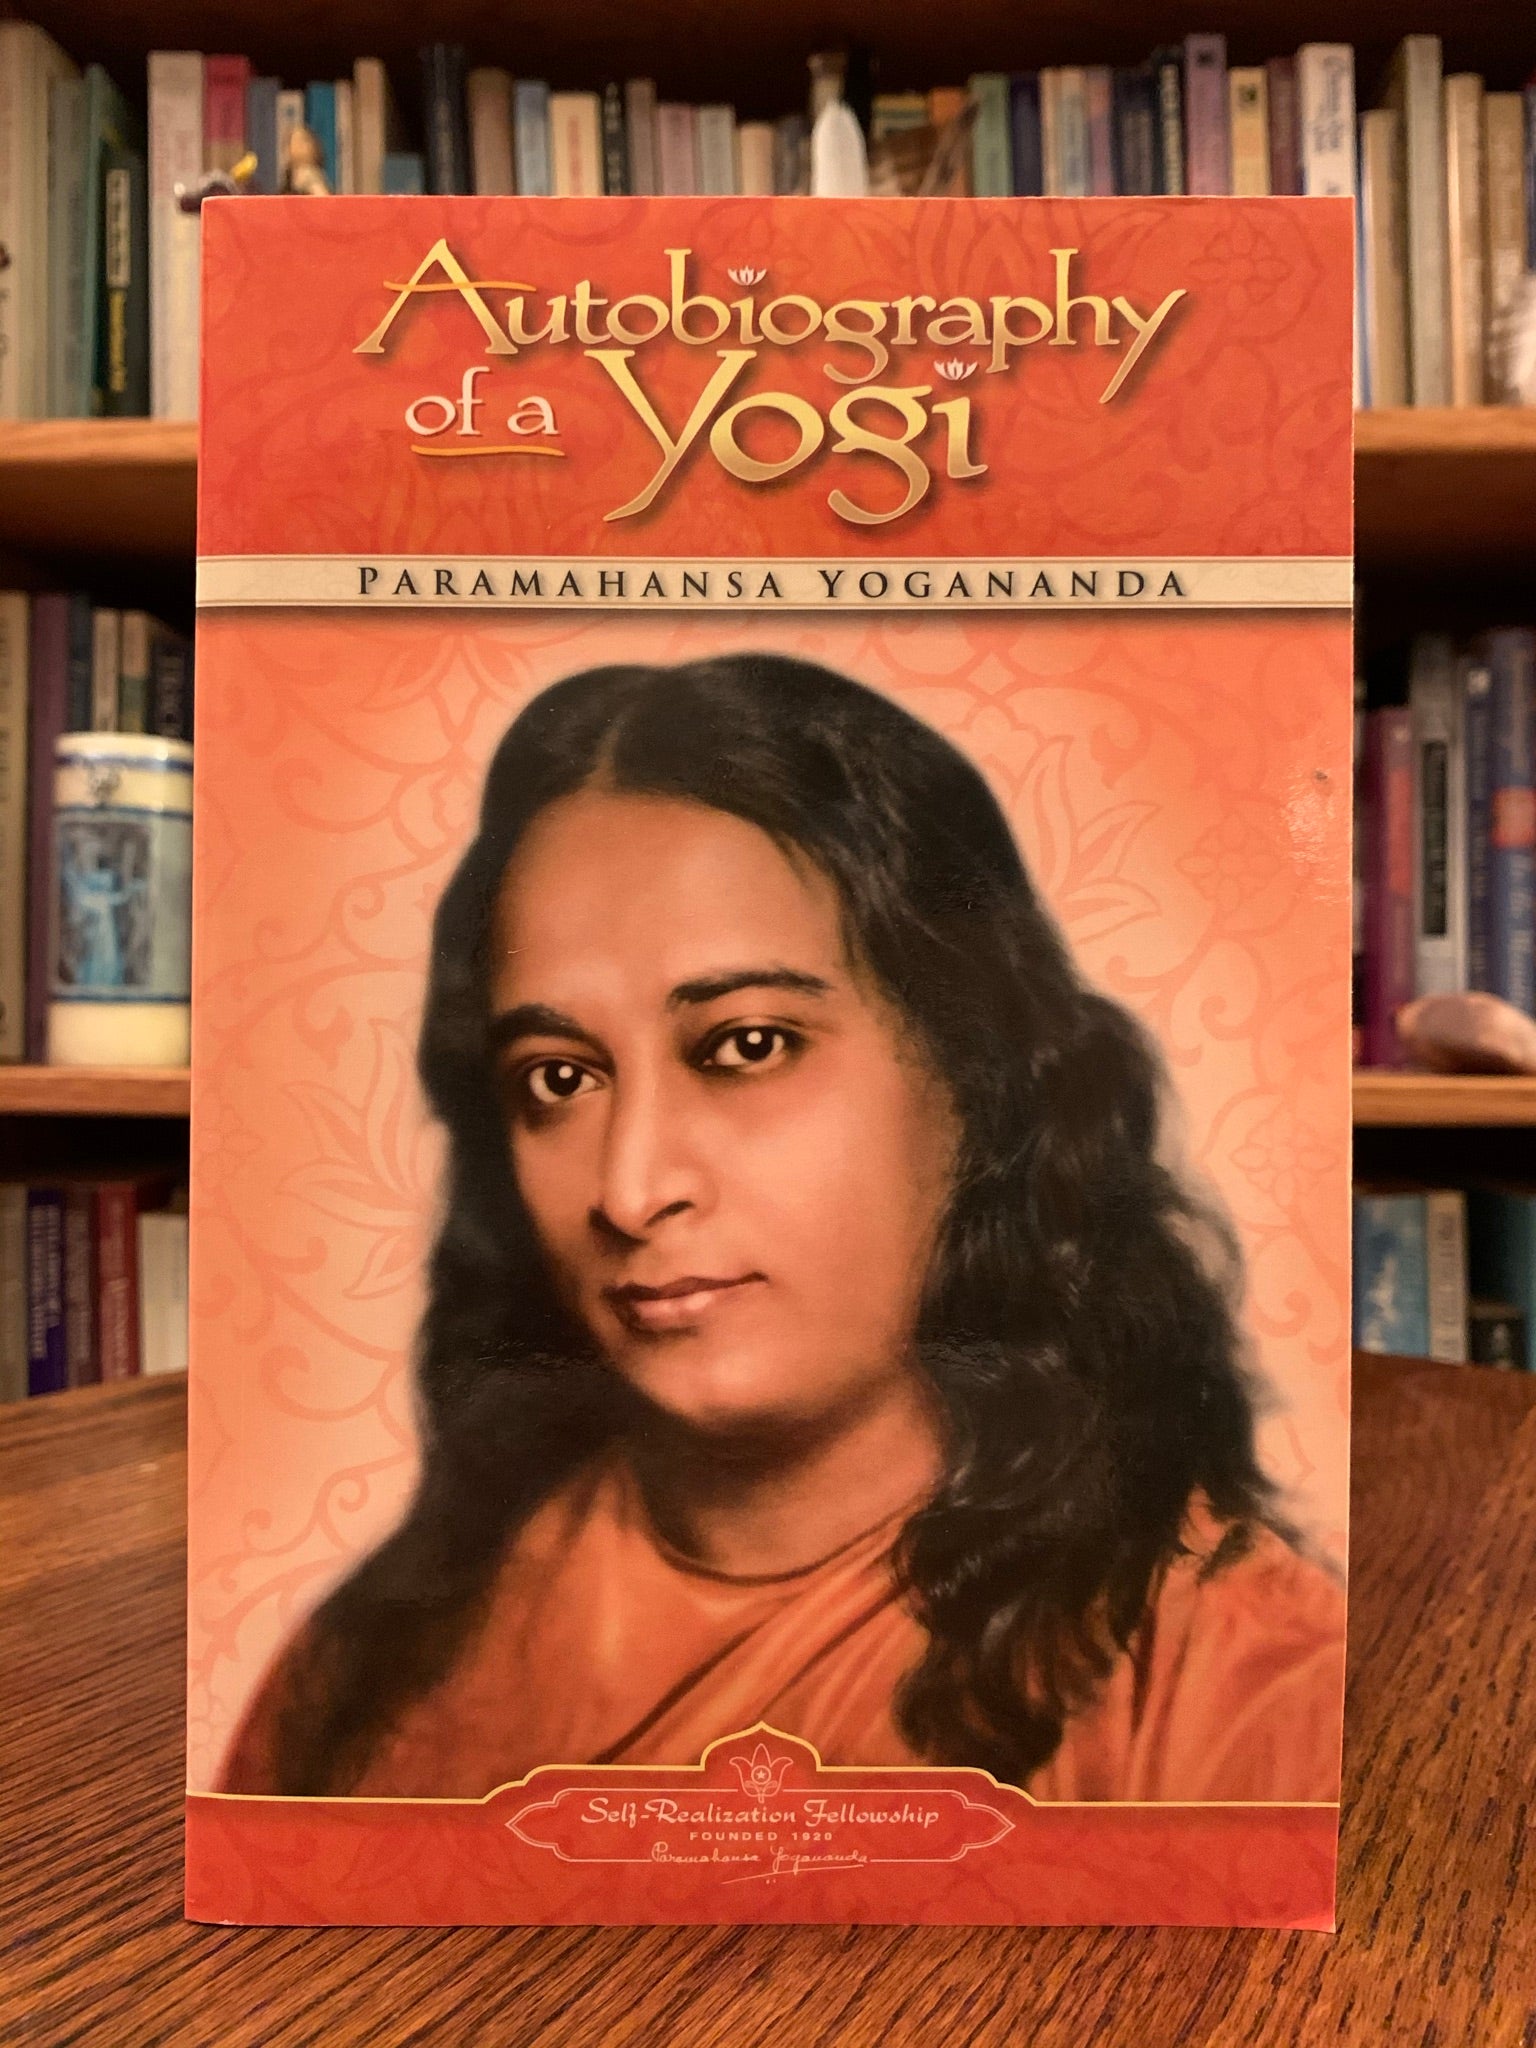 Close-up of front cover. Autobiography of a Yogi by Paramahansa Yogananda is a most wonderful journey to take, walking in Yogananda's footsteps as he moves through his life - and what an amazing and magical life it was. He was a great spiritual teacher and Yogi. The book was "named one of the best spiritual books of the 20th century. Cost is $12.50